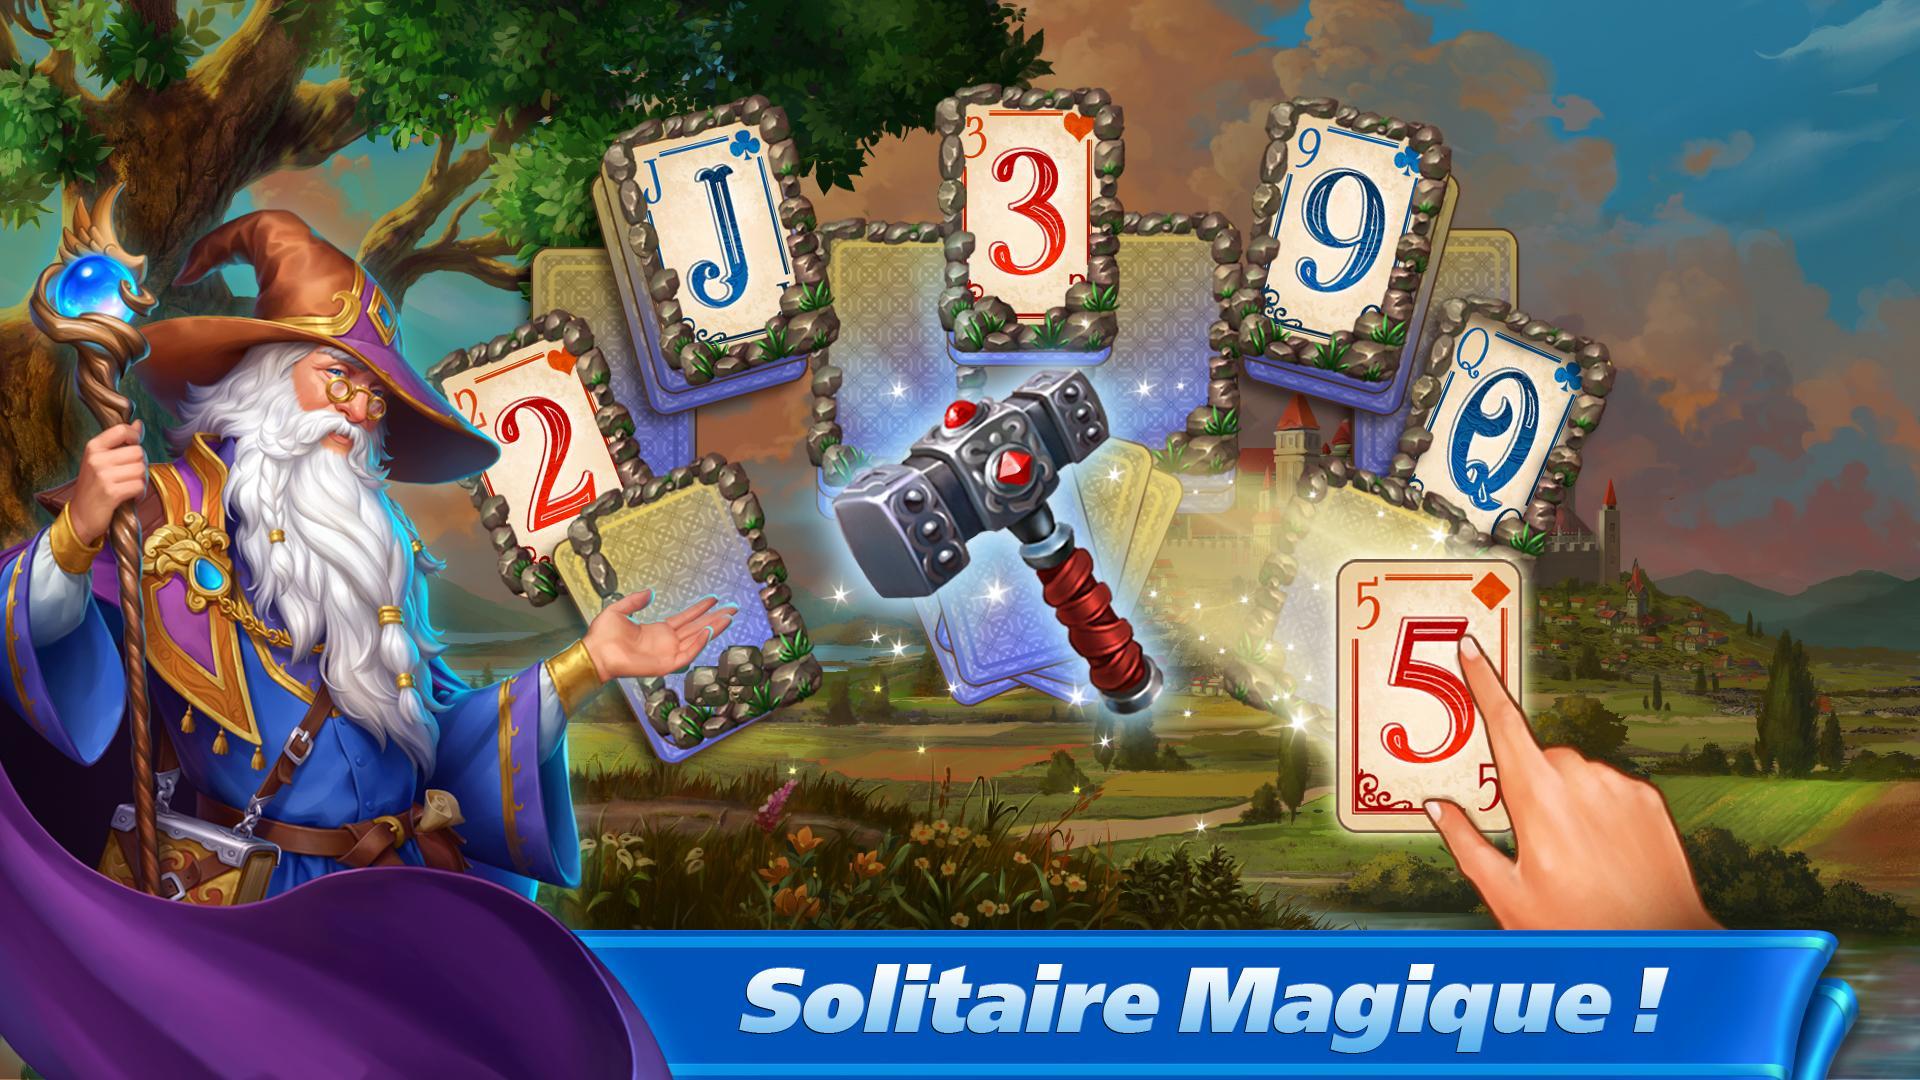 Screenshot 1 of Emerland Solitaire 2 Card Game 155